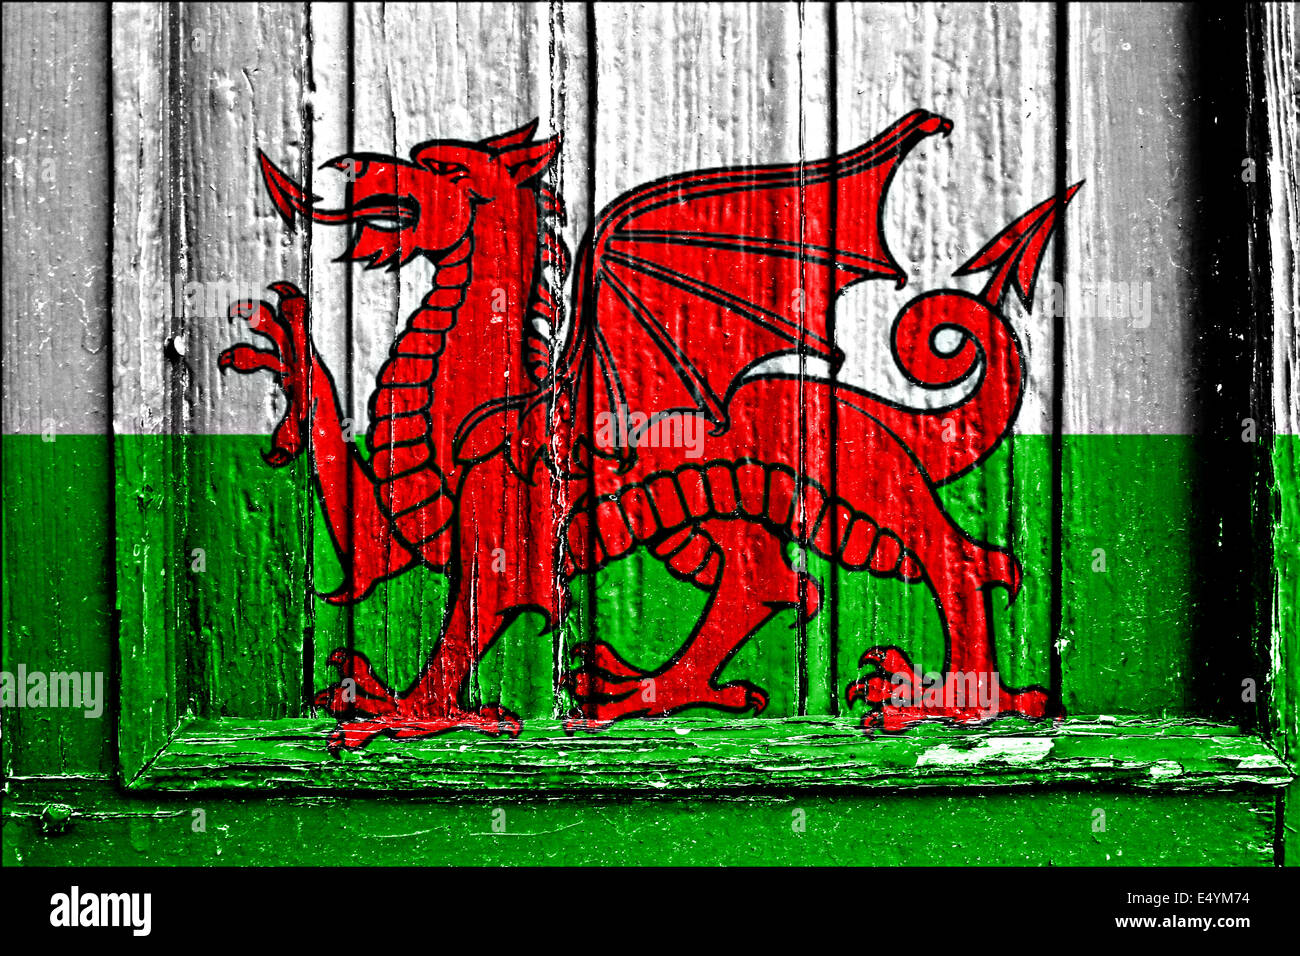 flag of Wales painted on wooden frame Stock Photo